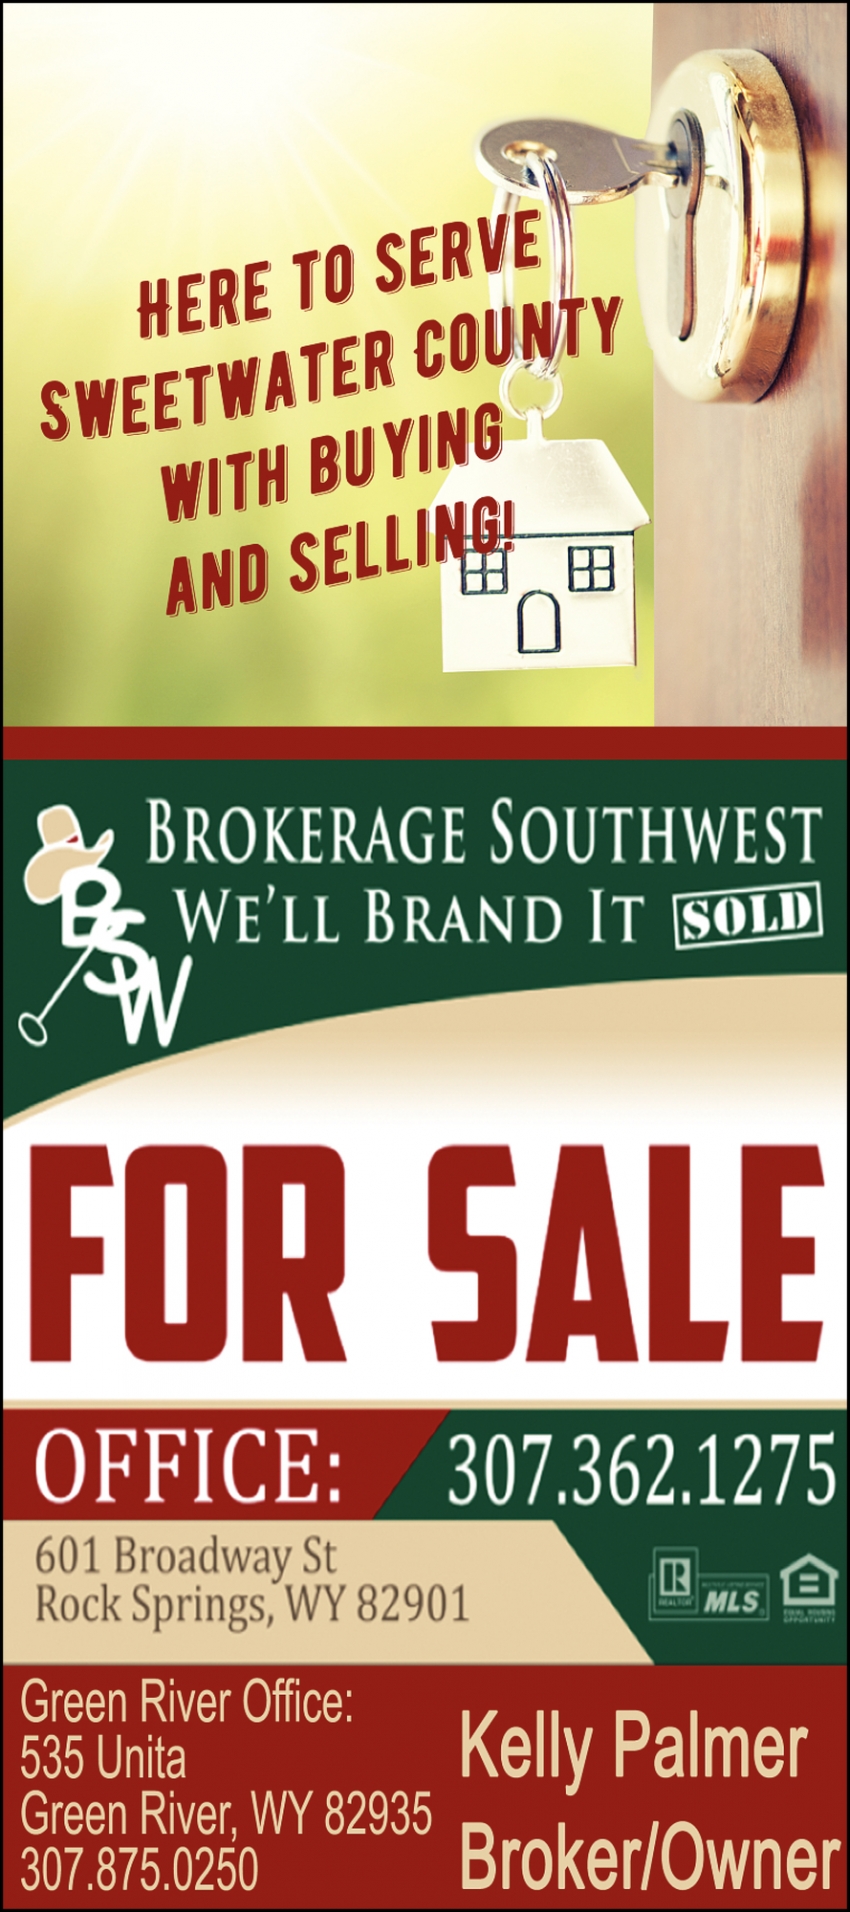 Here To Serve Sweetwater County With Buying And Selling!